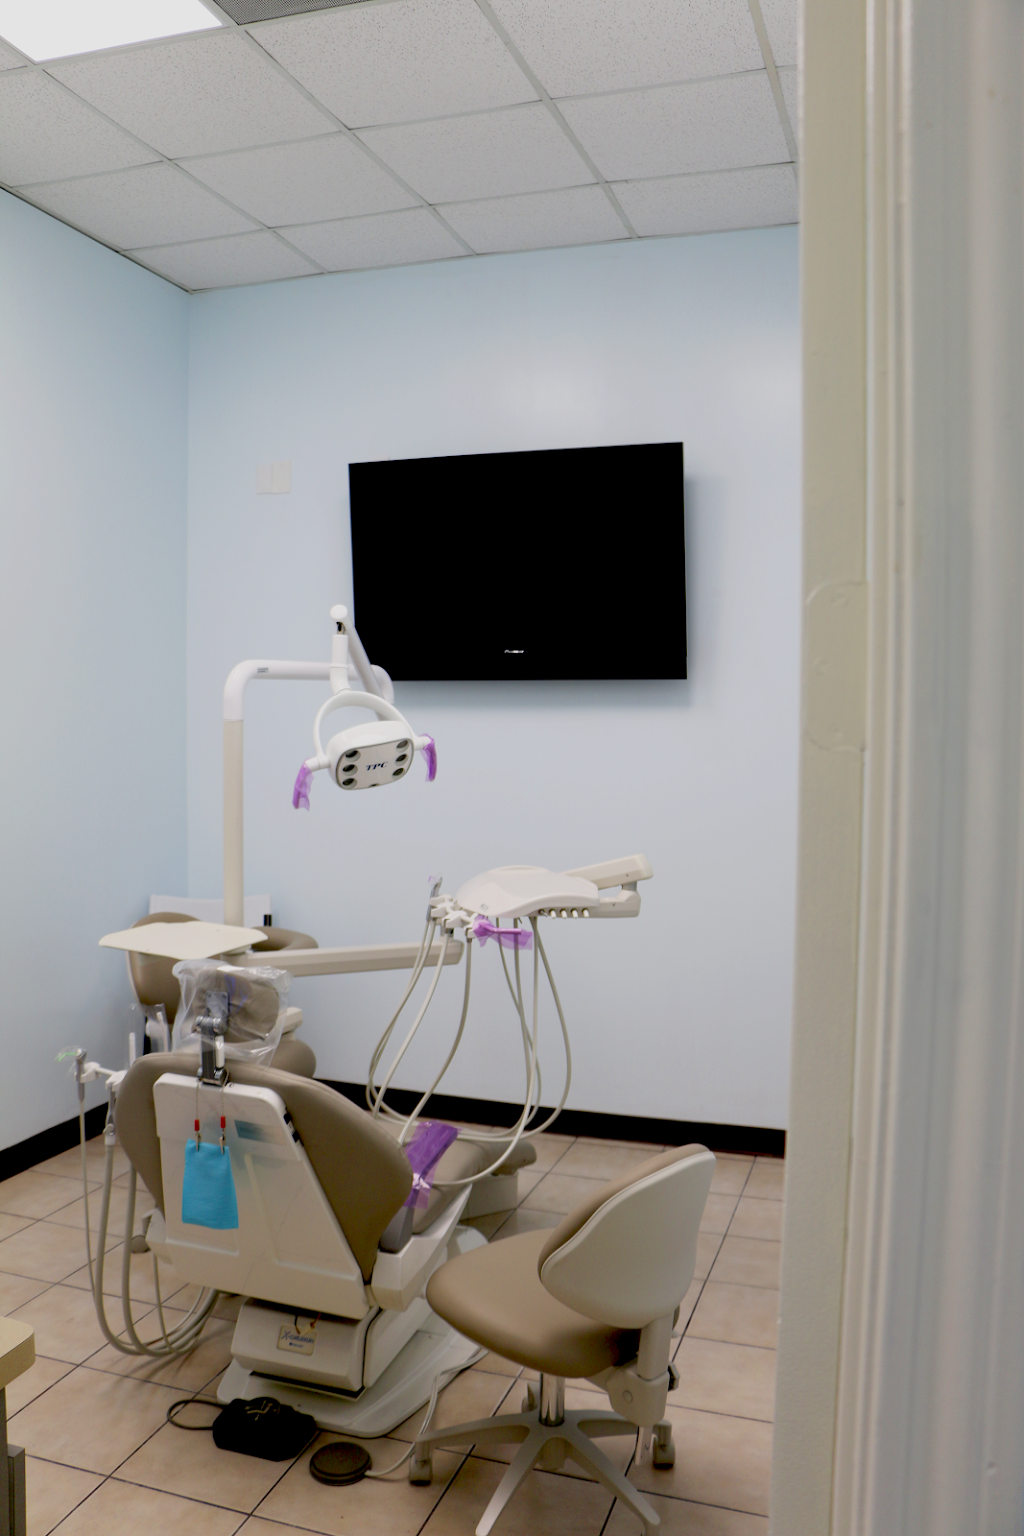 My Tooth Fairys | 4429 Griggs Rd, Houston, TX 77021, USA | Phone: (832) 582-7756